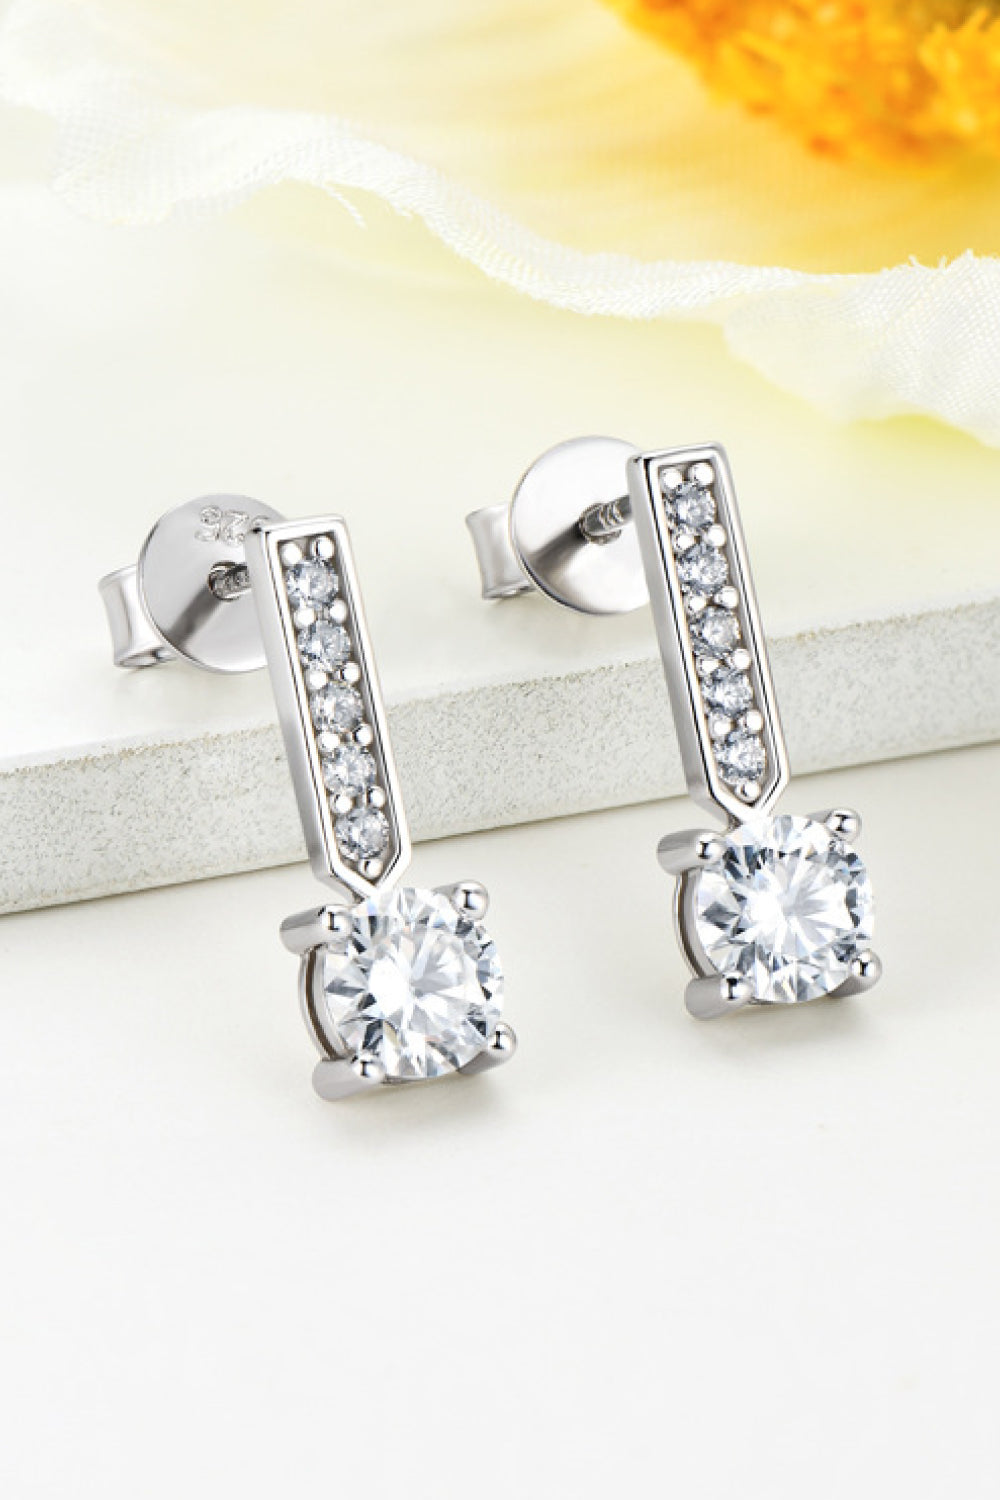 Moissanite and Zircon 925 Sterling Silver Drop Earrings (Platinum-Plated Fine Silver)